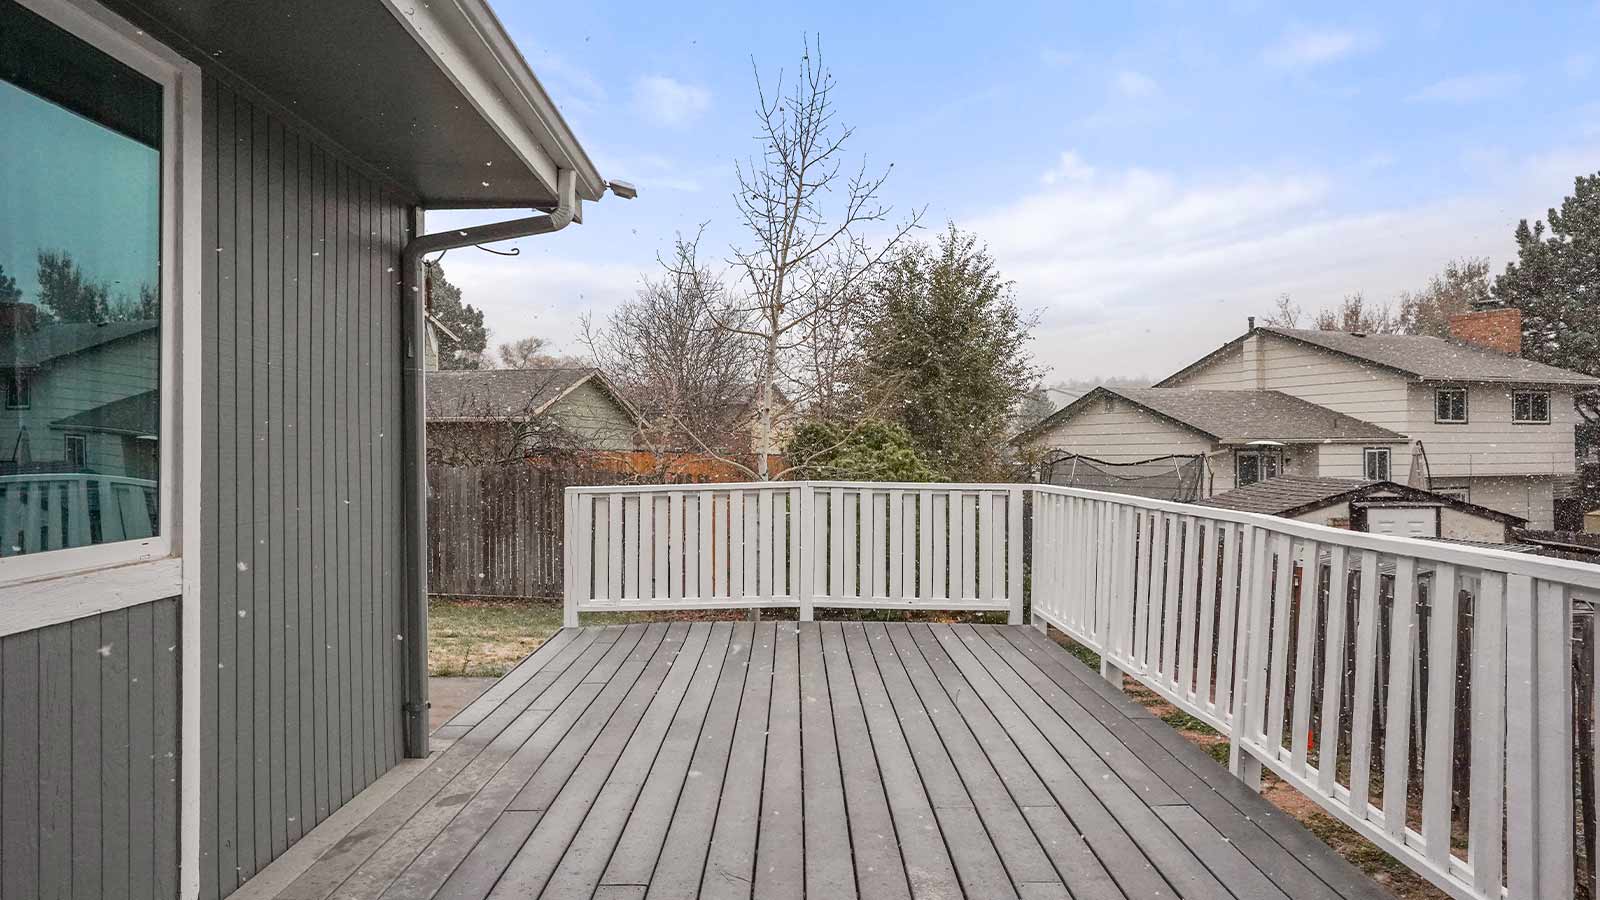 A wooden deck with a railing, overlooking a snowy backyard and neighboring houses.